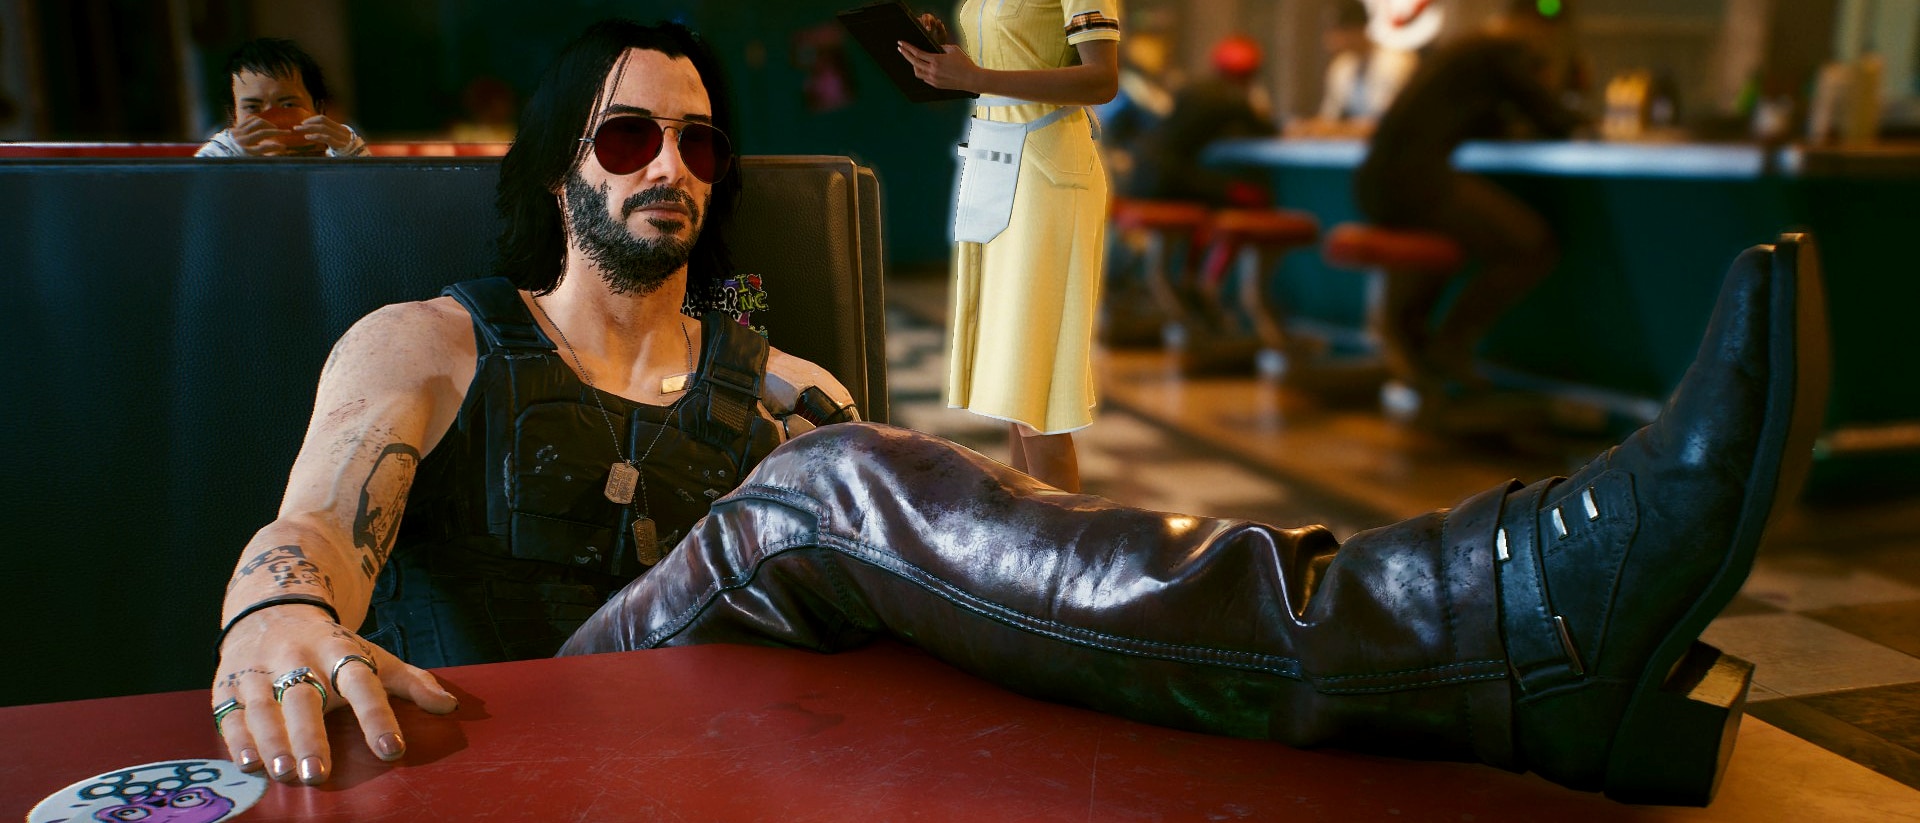 Cyberpunk 2077' will get a 'Game of the Year' edition